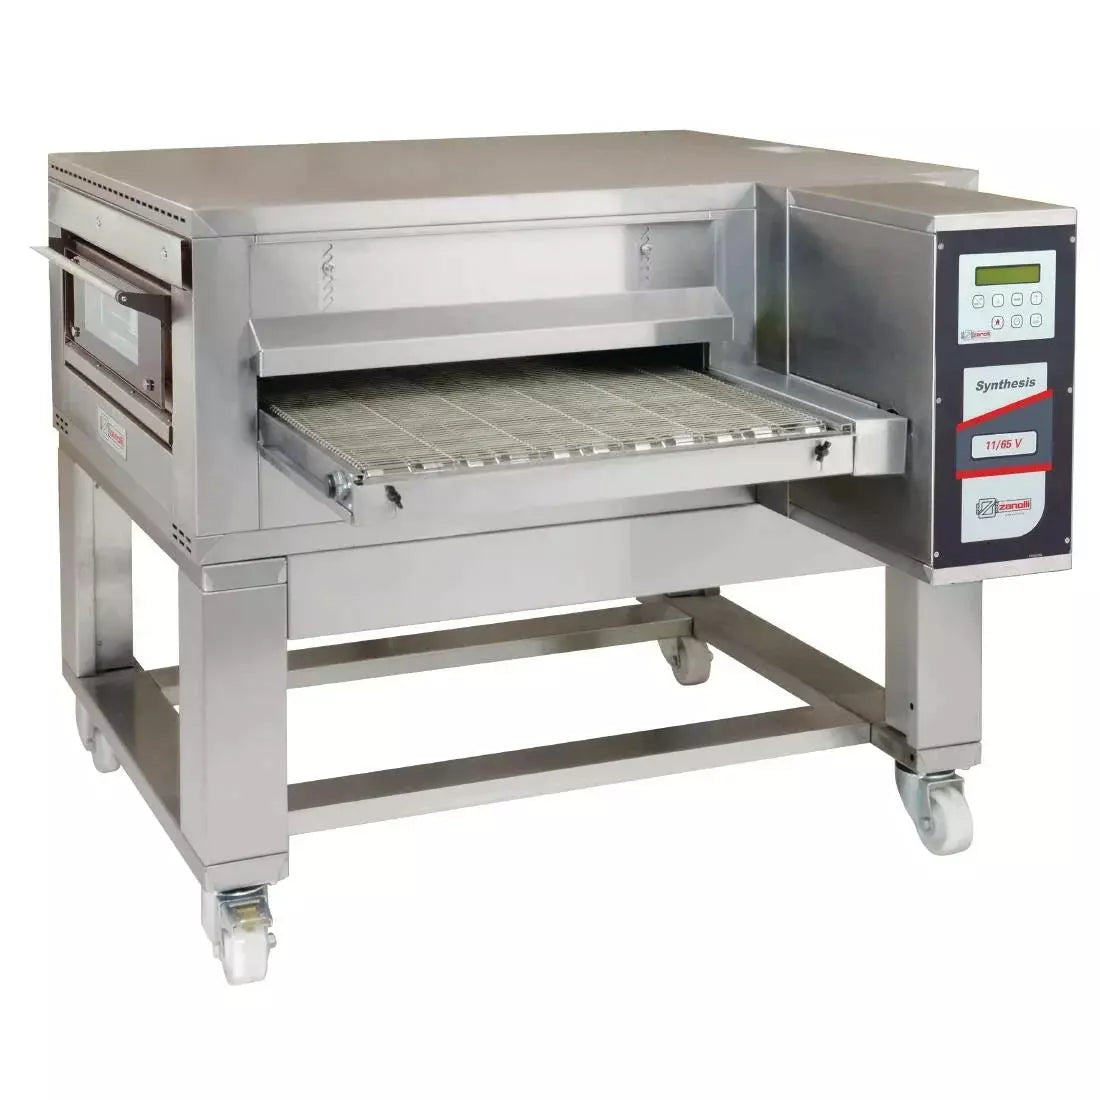 Zanolli Synthesis Electric 11/65 Conveyor Pizza Oven